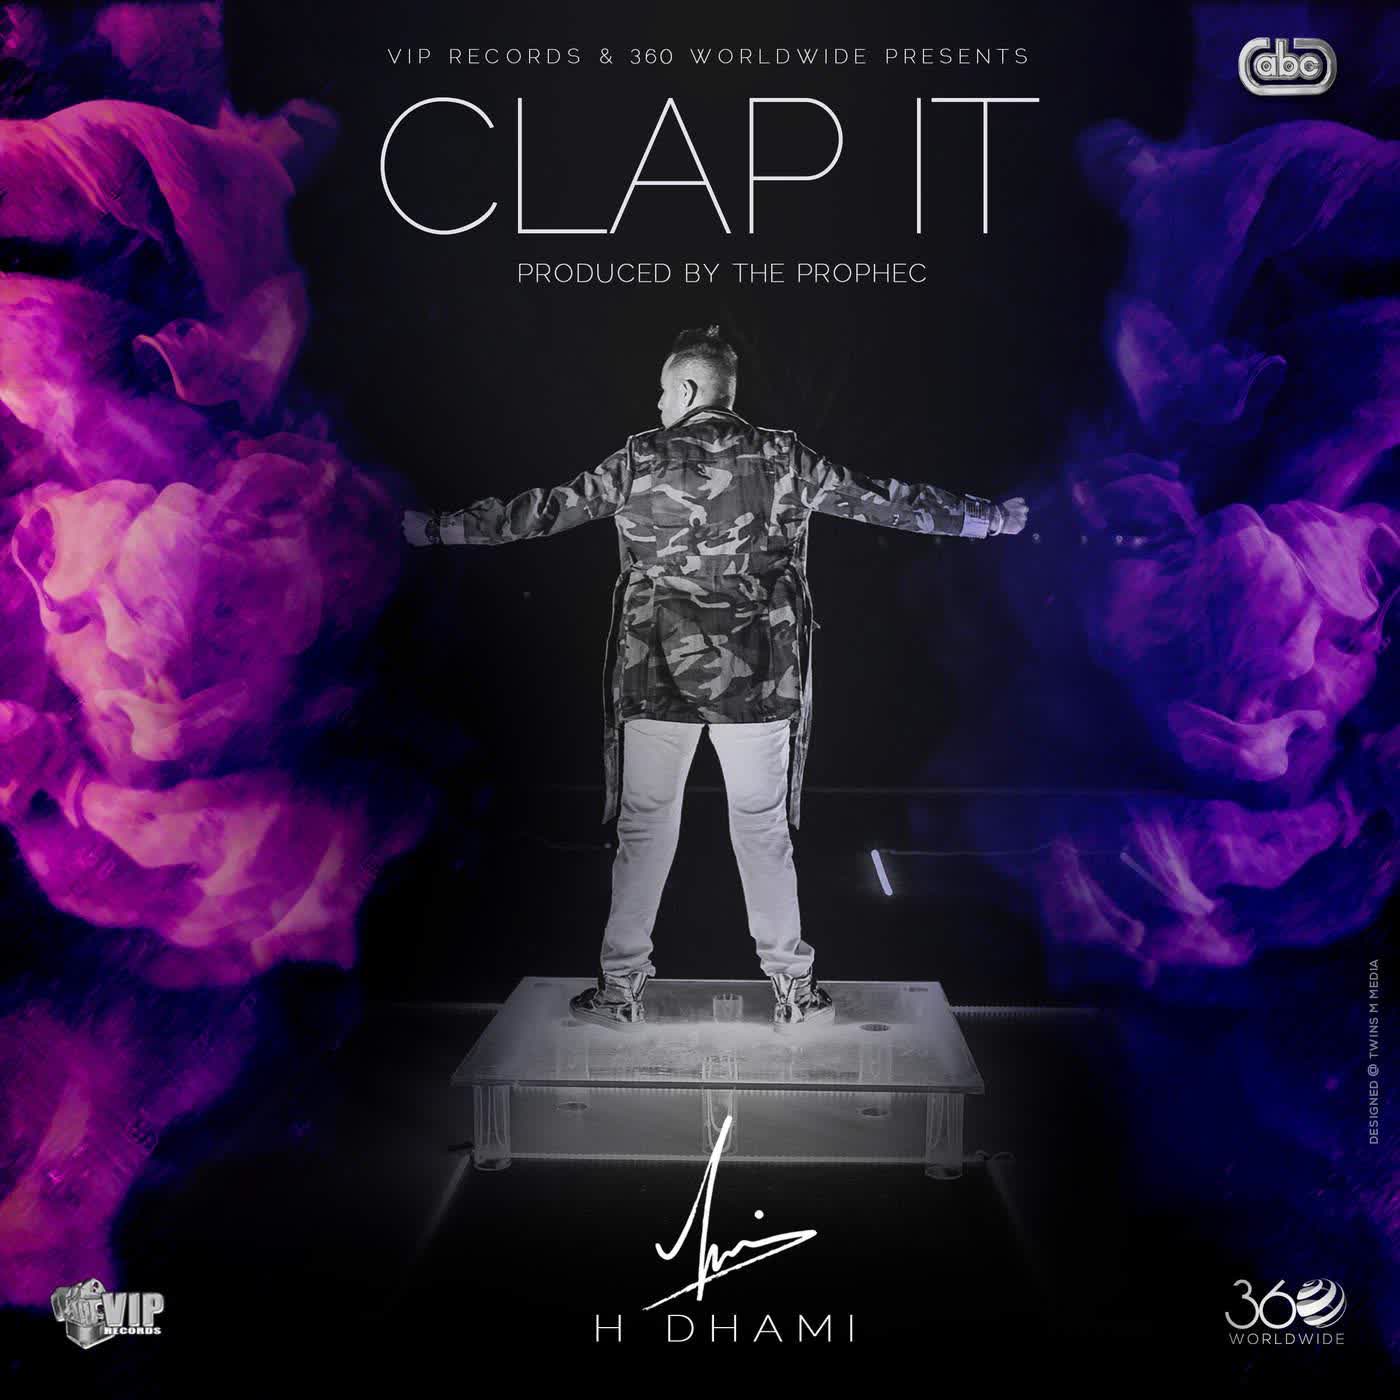 Clap It H Dhami Mp3 song download